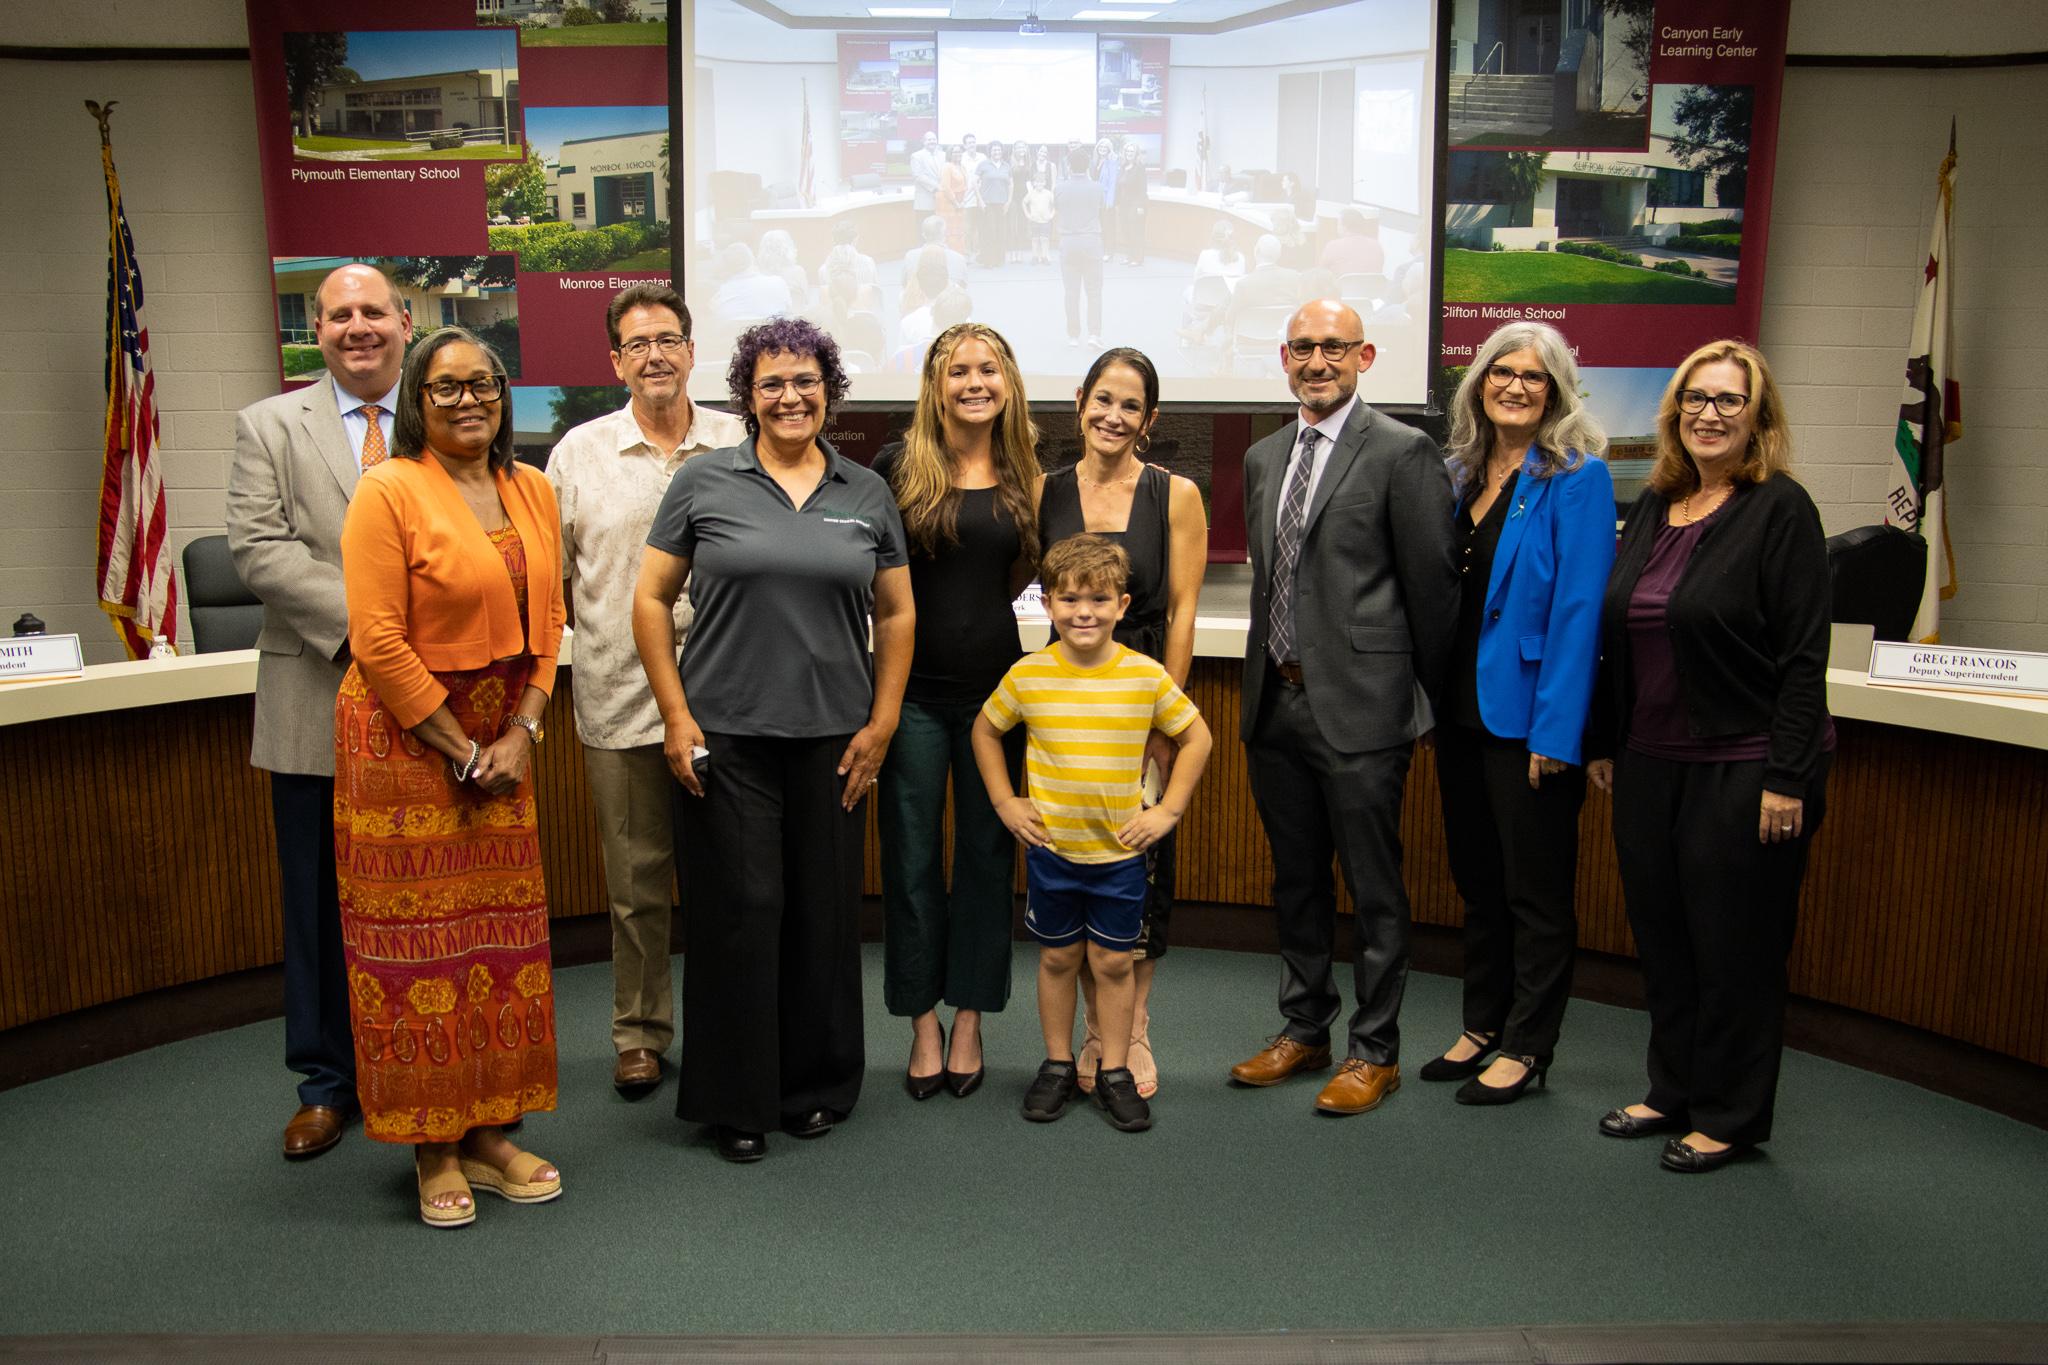 Emma Nahapetian from MHS and Sarah Tripp from Mountain Park School will join the MUSD Board of Education for the 2022-23 school year.